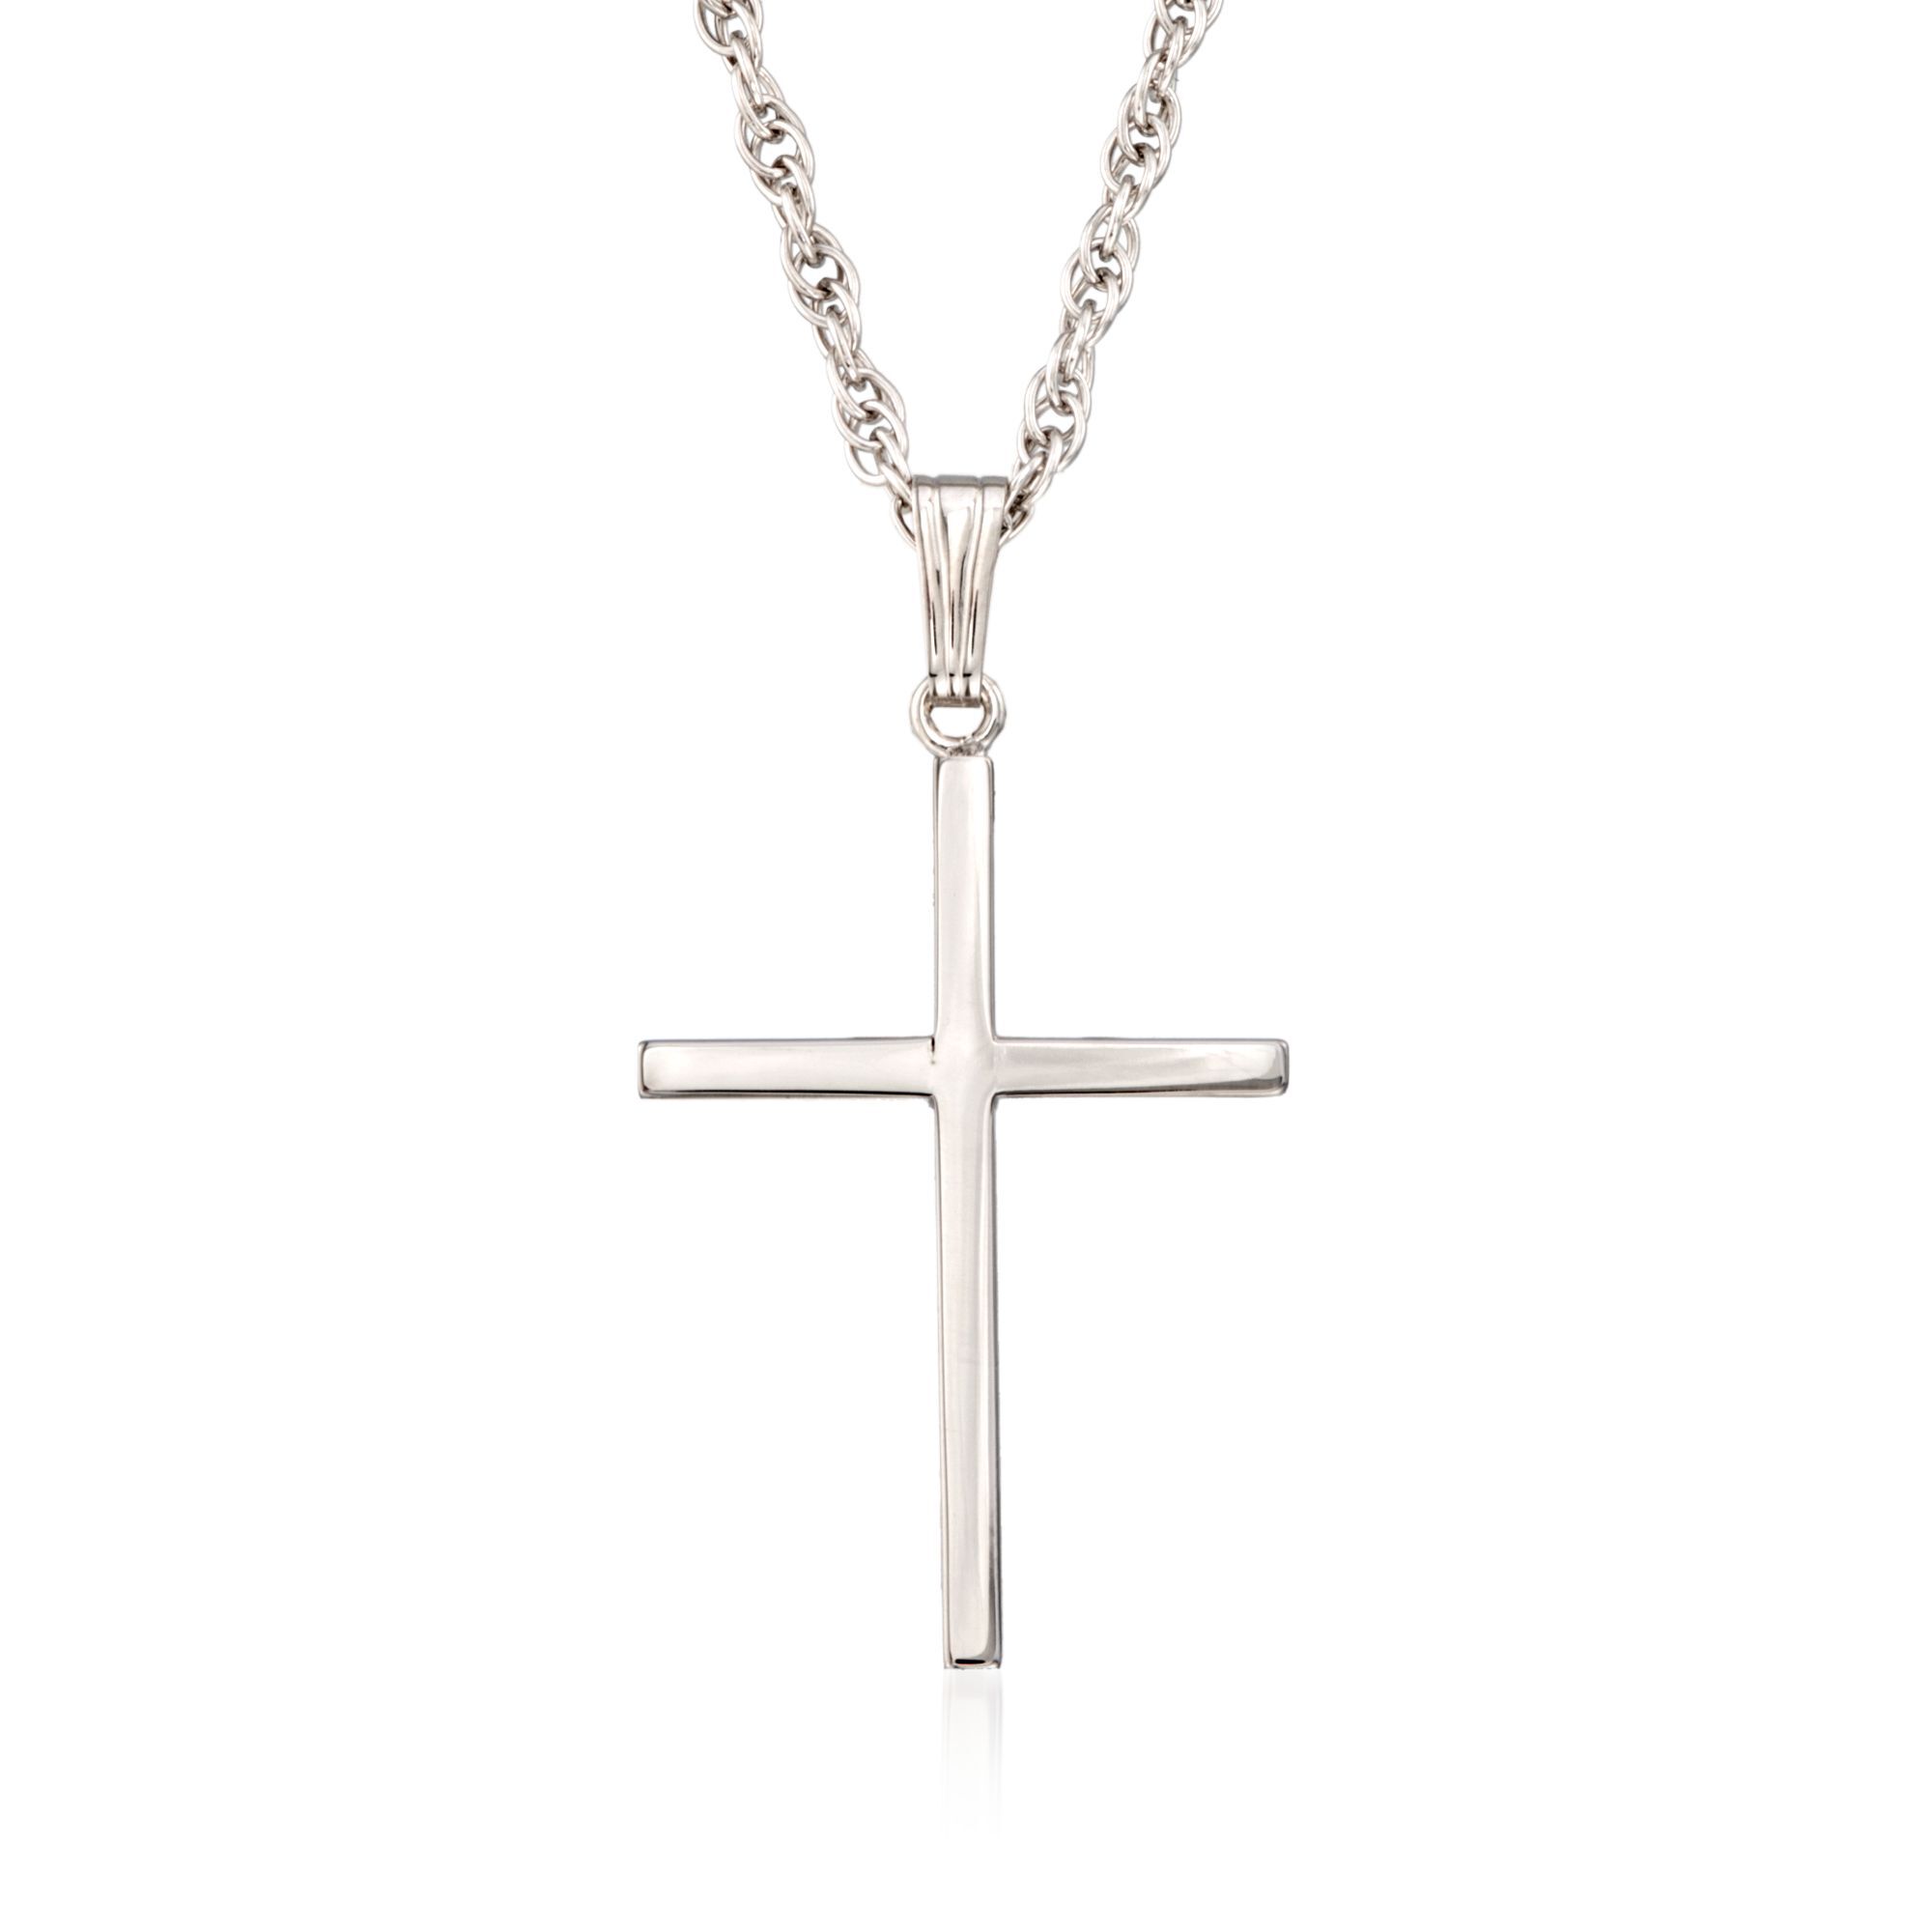 Unisex Cross Necklace Stainless Steel TEMPBEAU Christian Cross Pendant Mini Size Silver Retro Grey for Men and Women with 51cm Chain Jewelry Gift